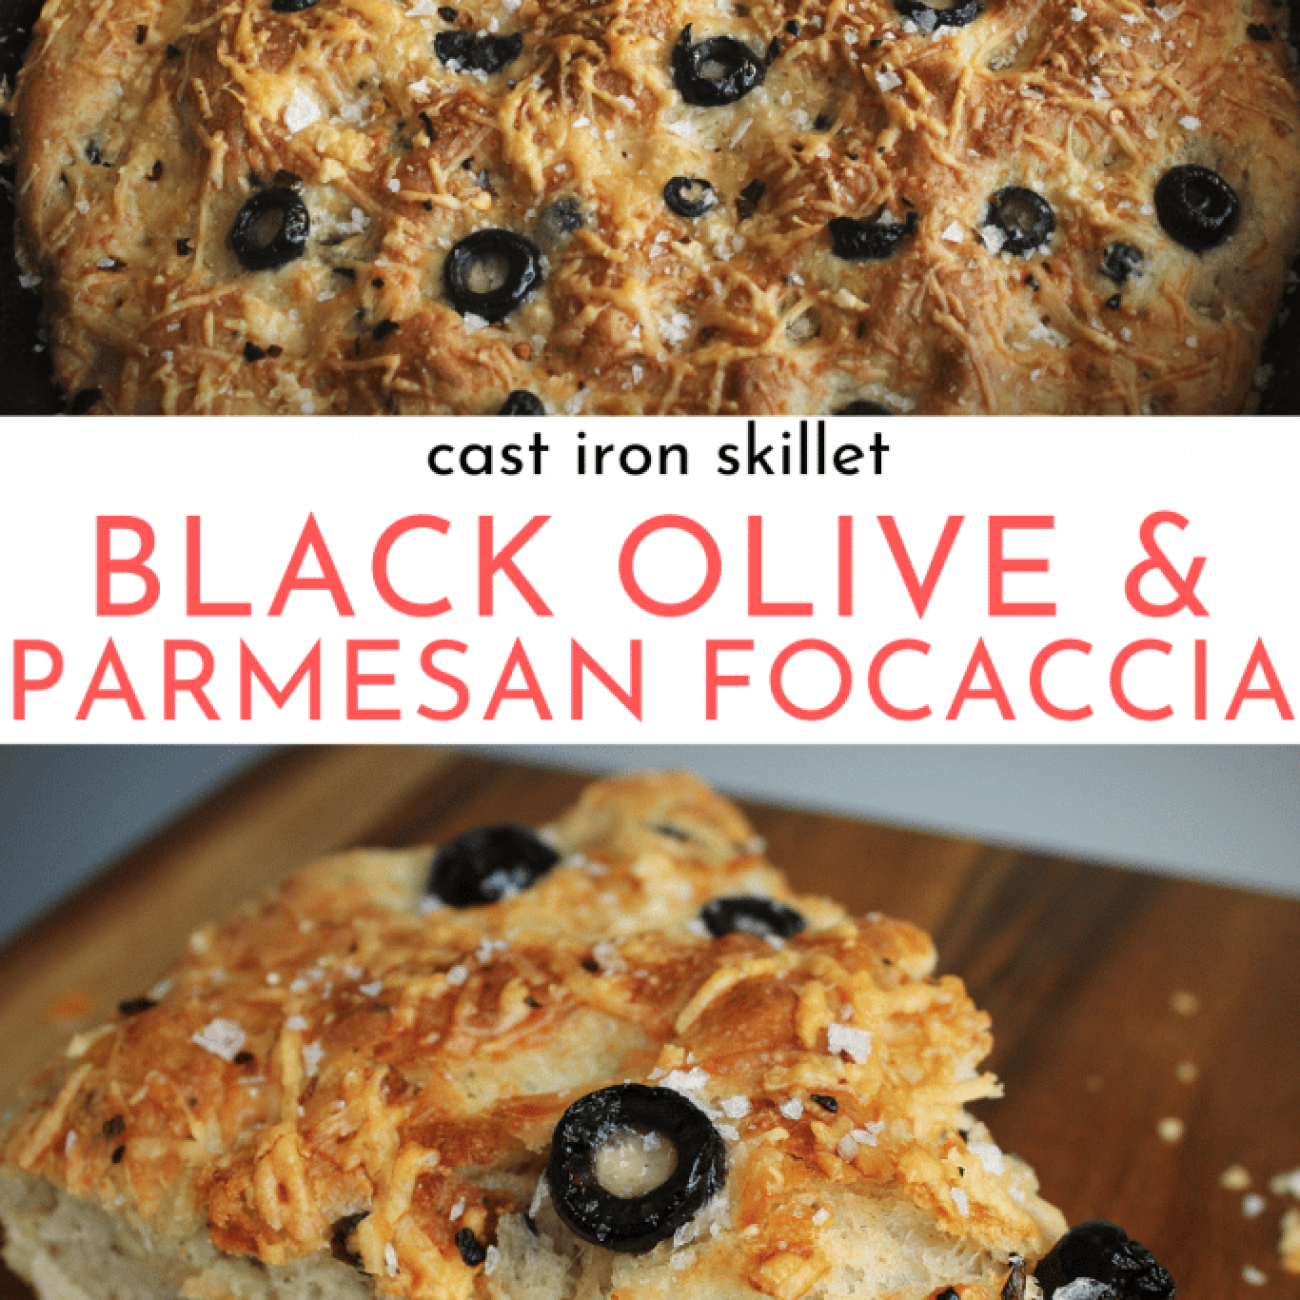 Focaccia Bread Herbed With Black Olive